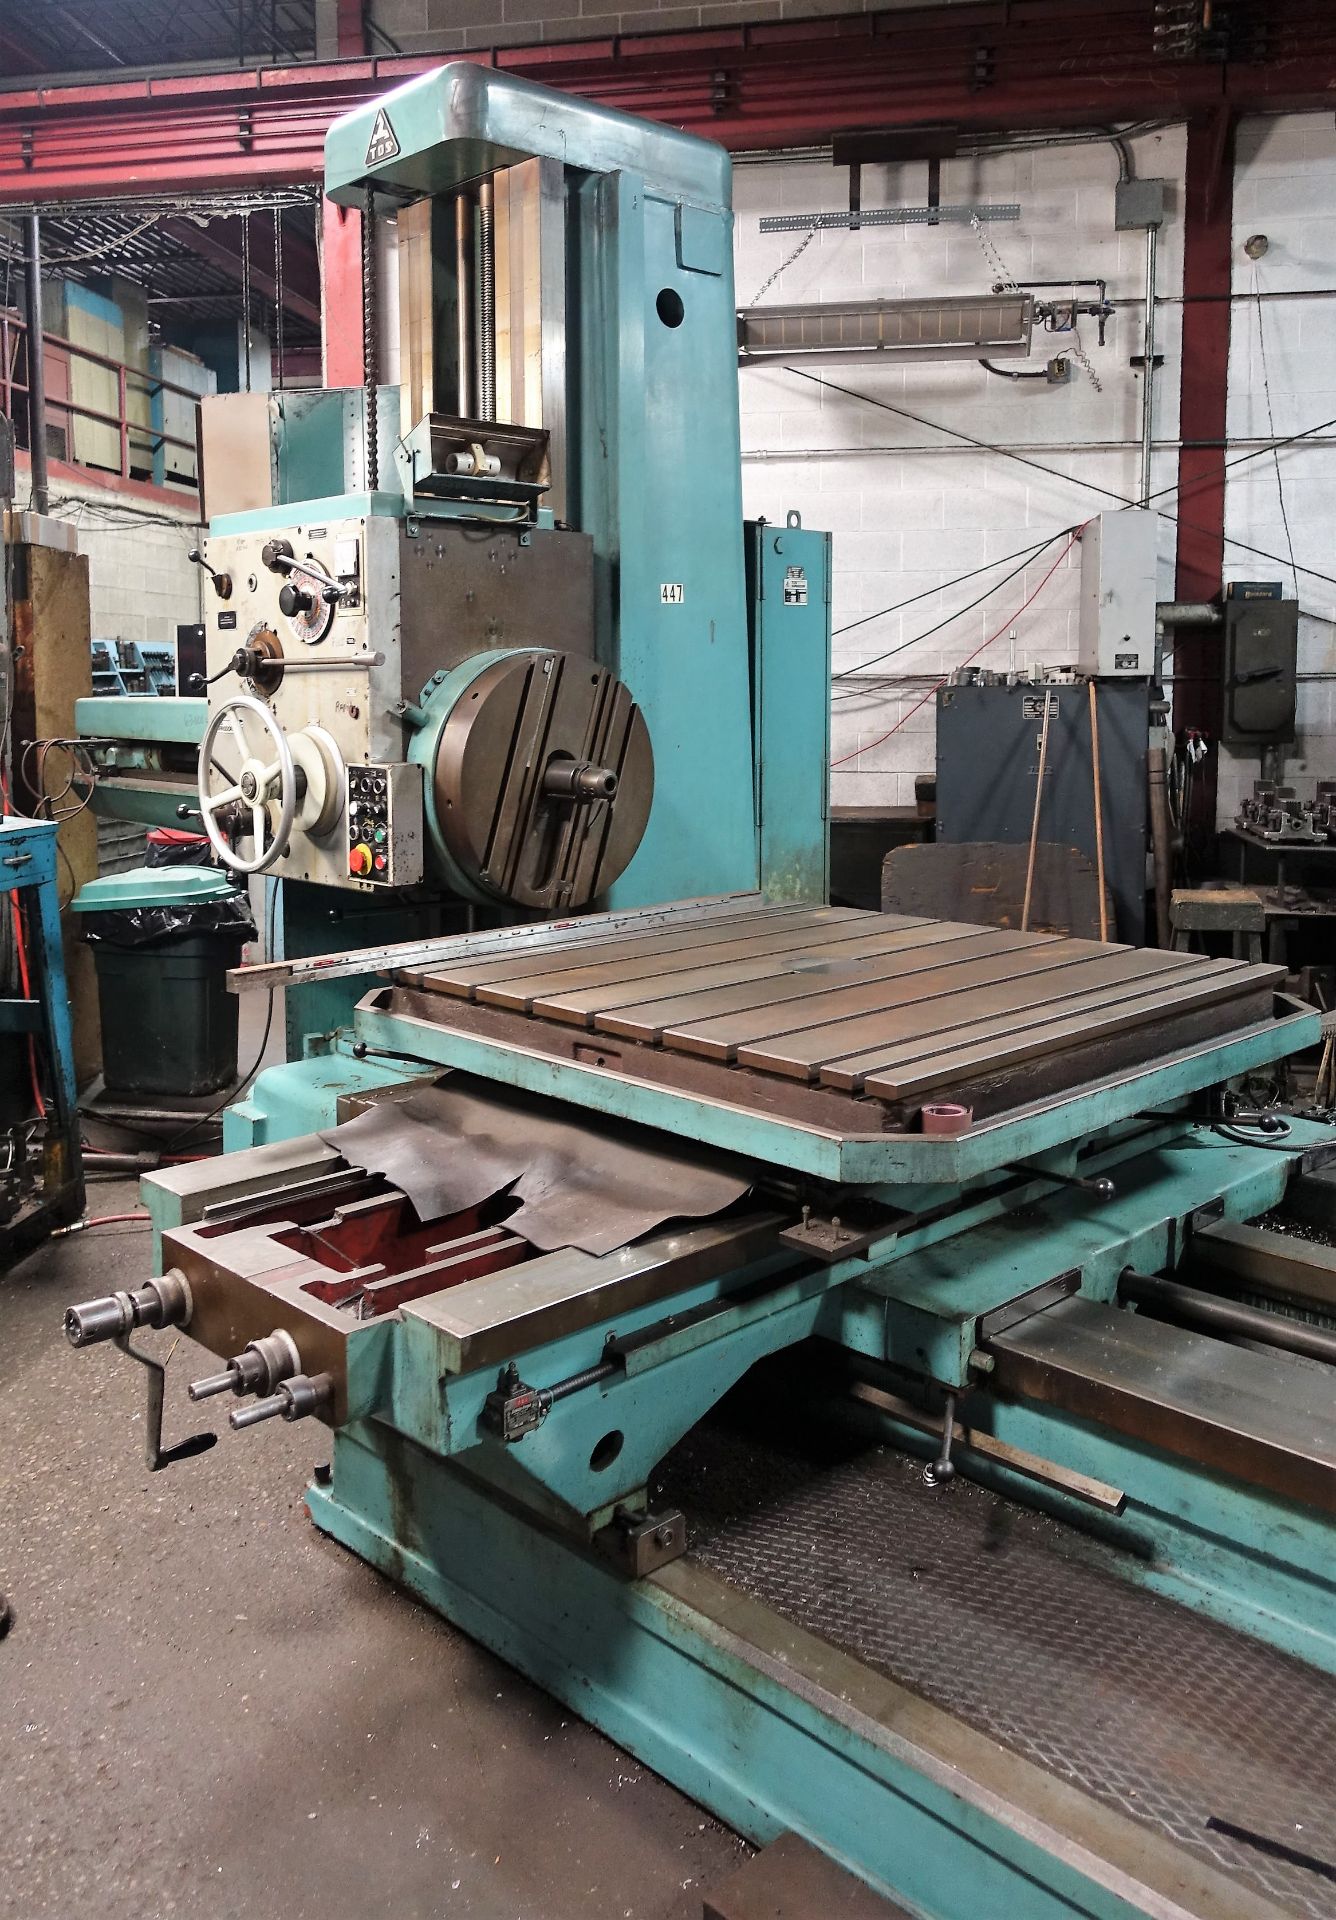 Tos Model W100A 4"" Table Type Horizontal Boring Mill